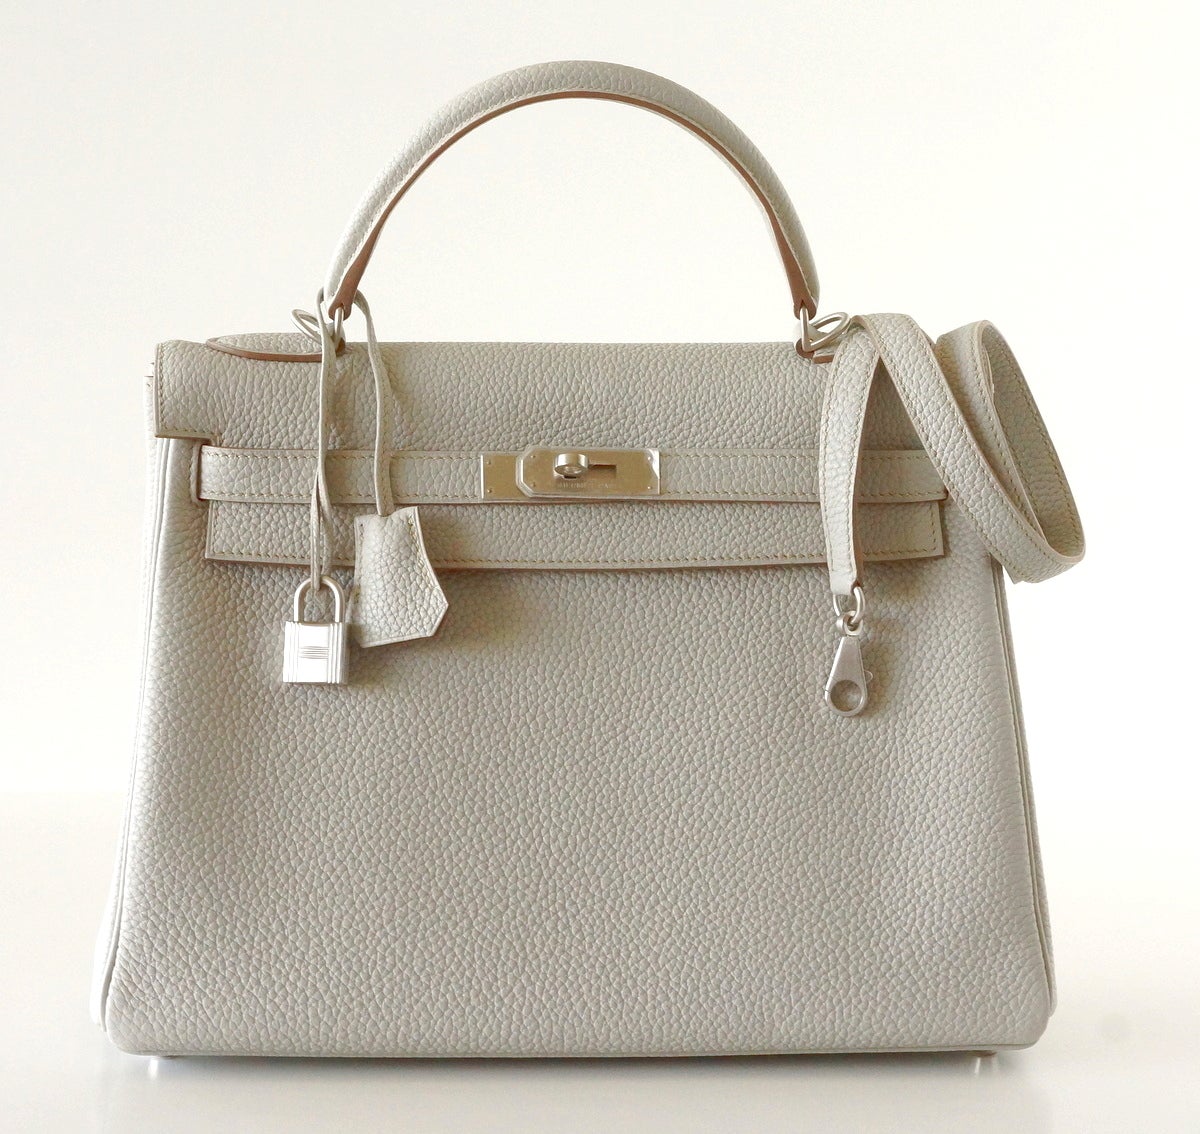 32 cm Hermes Kelly Retourne Special Order Horse Shoe with rare brushed palladium hardware.
Gris Perle with Gris Tourterelle interior creates a chic and sophisticated 
NEW or NEVER WORN.
Comes with signature HERMES box, raincoat, shoulder strap,